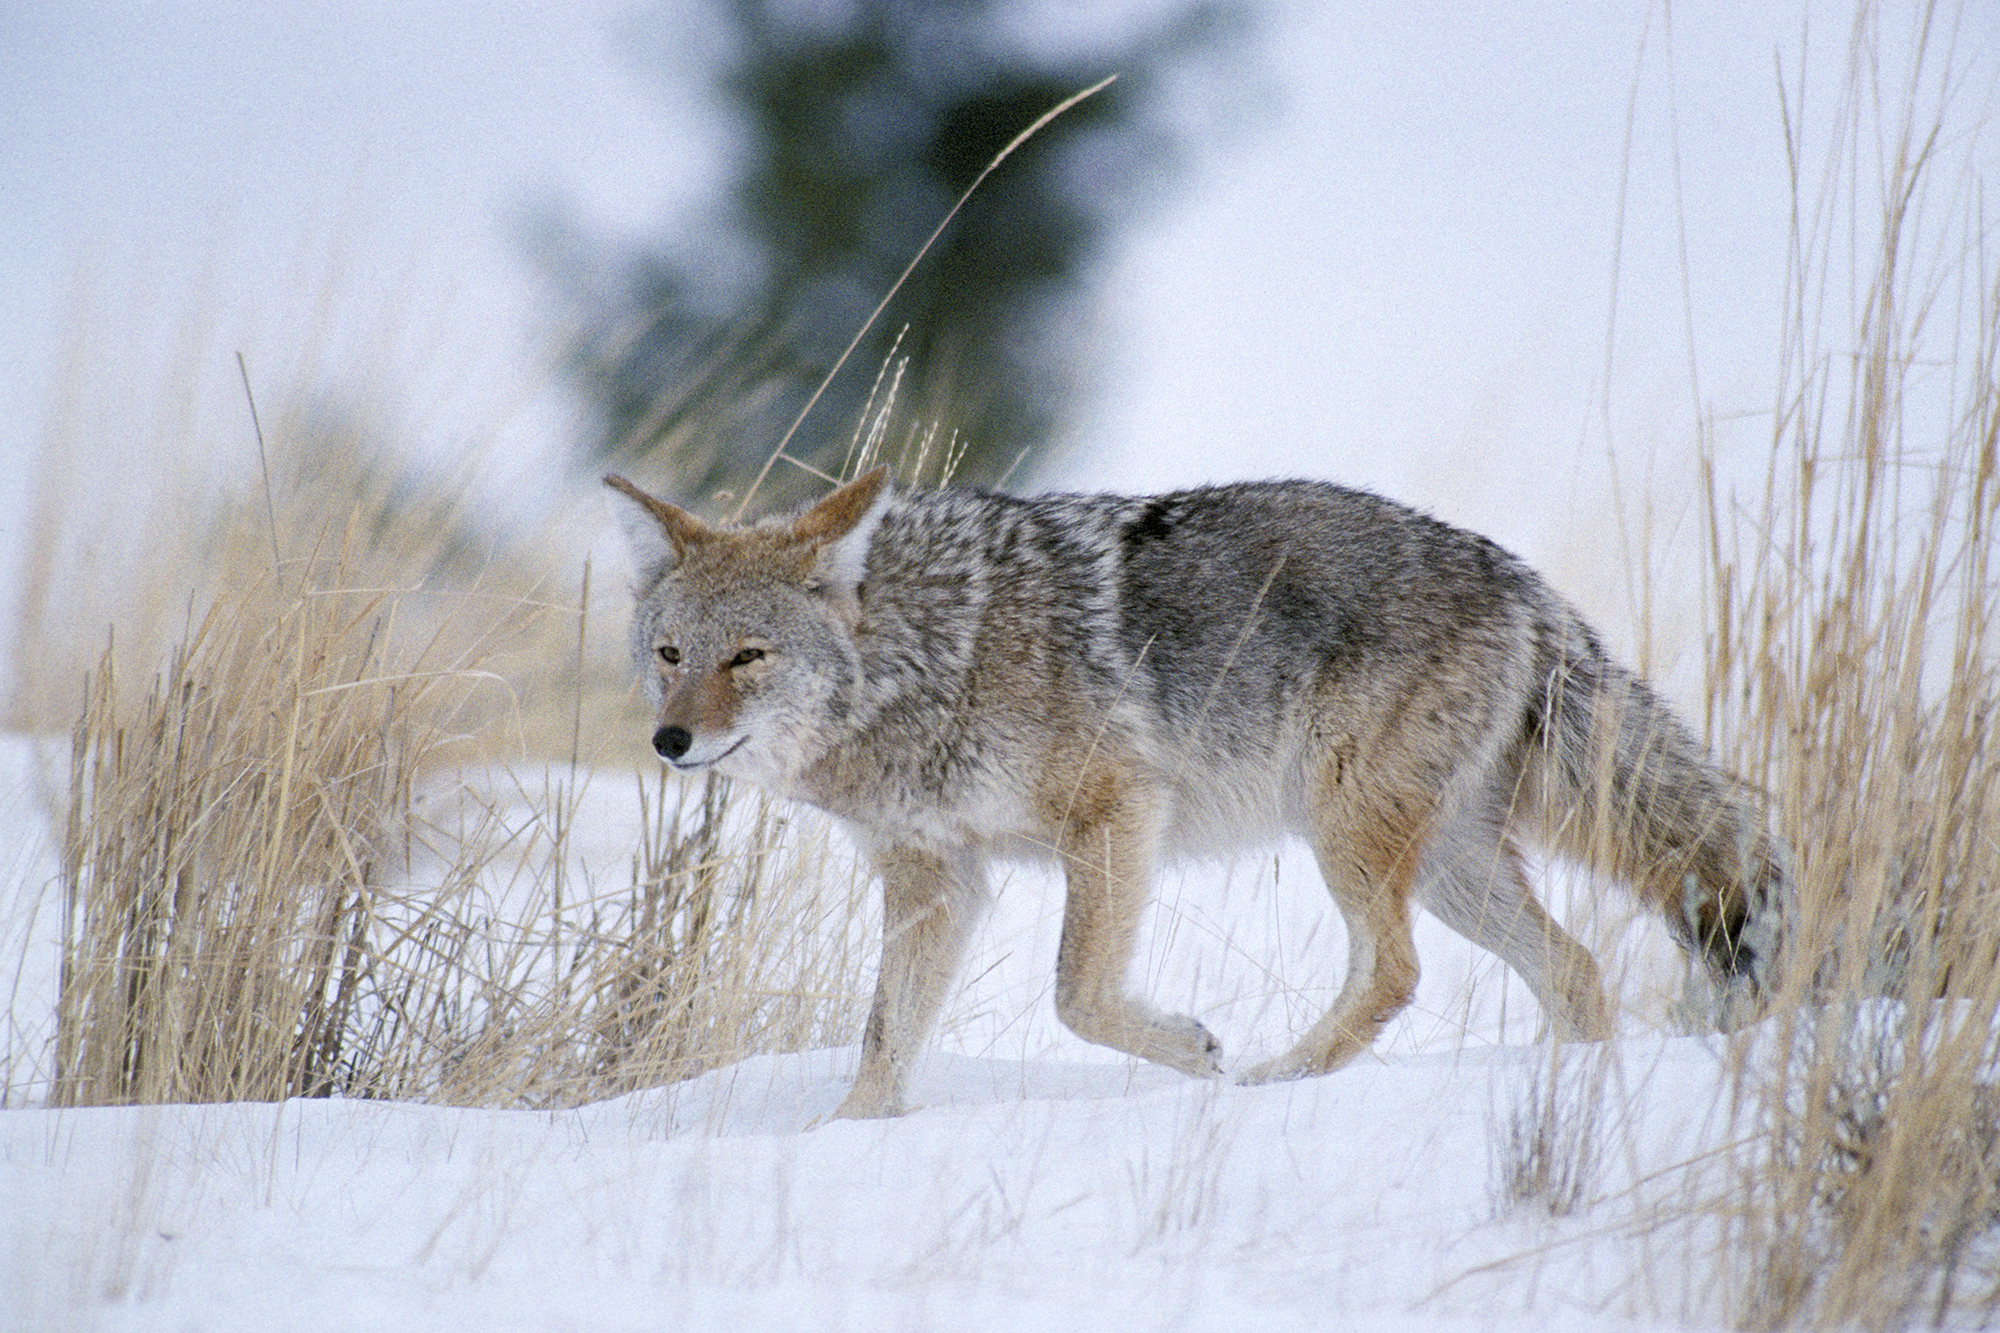 A healthy coyote trots through the snow in winter.